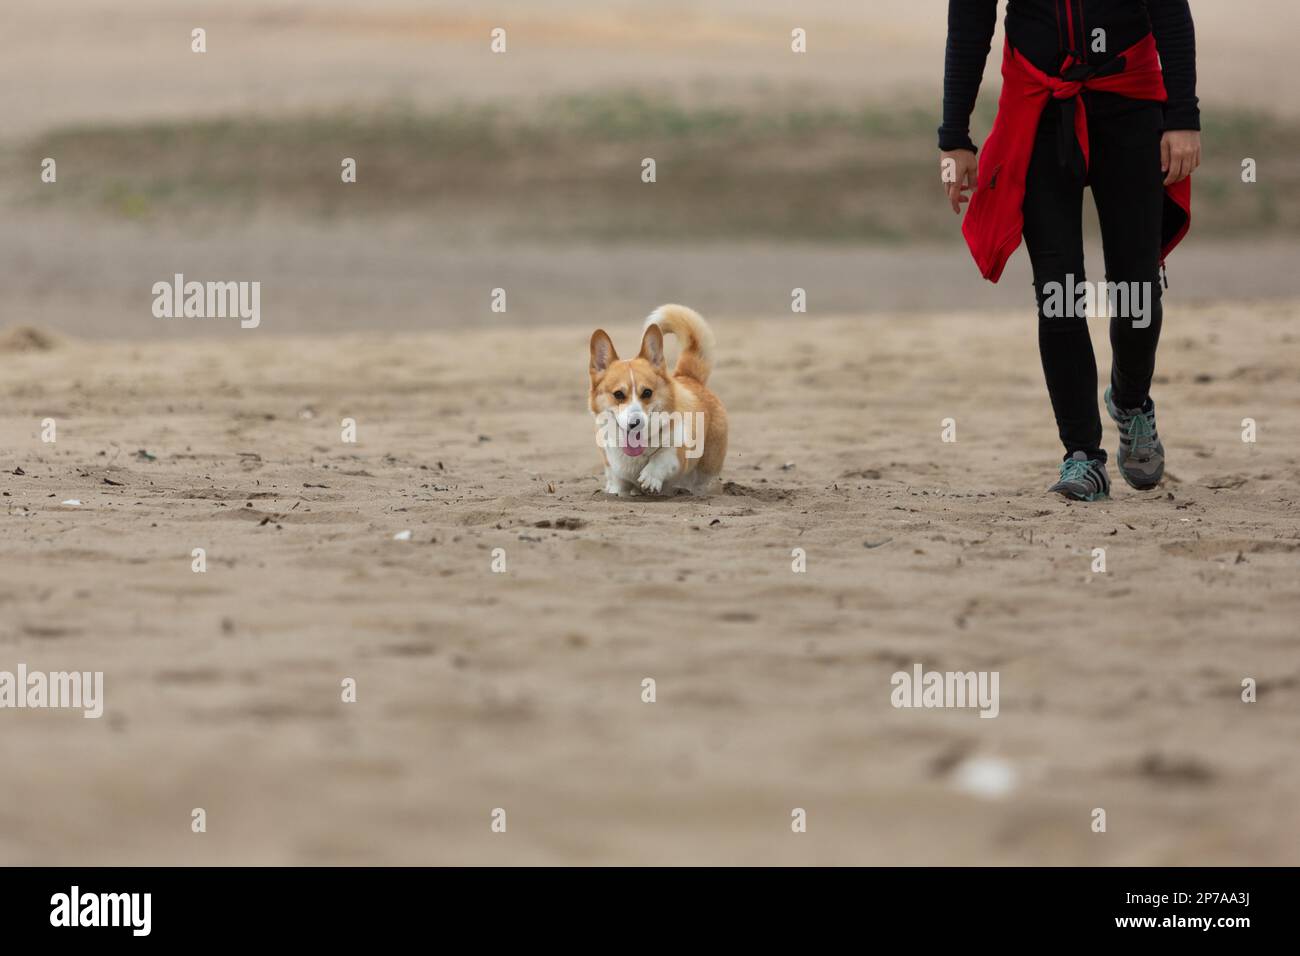 The owner is walking his dog through the desert. Summer Stock Photo